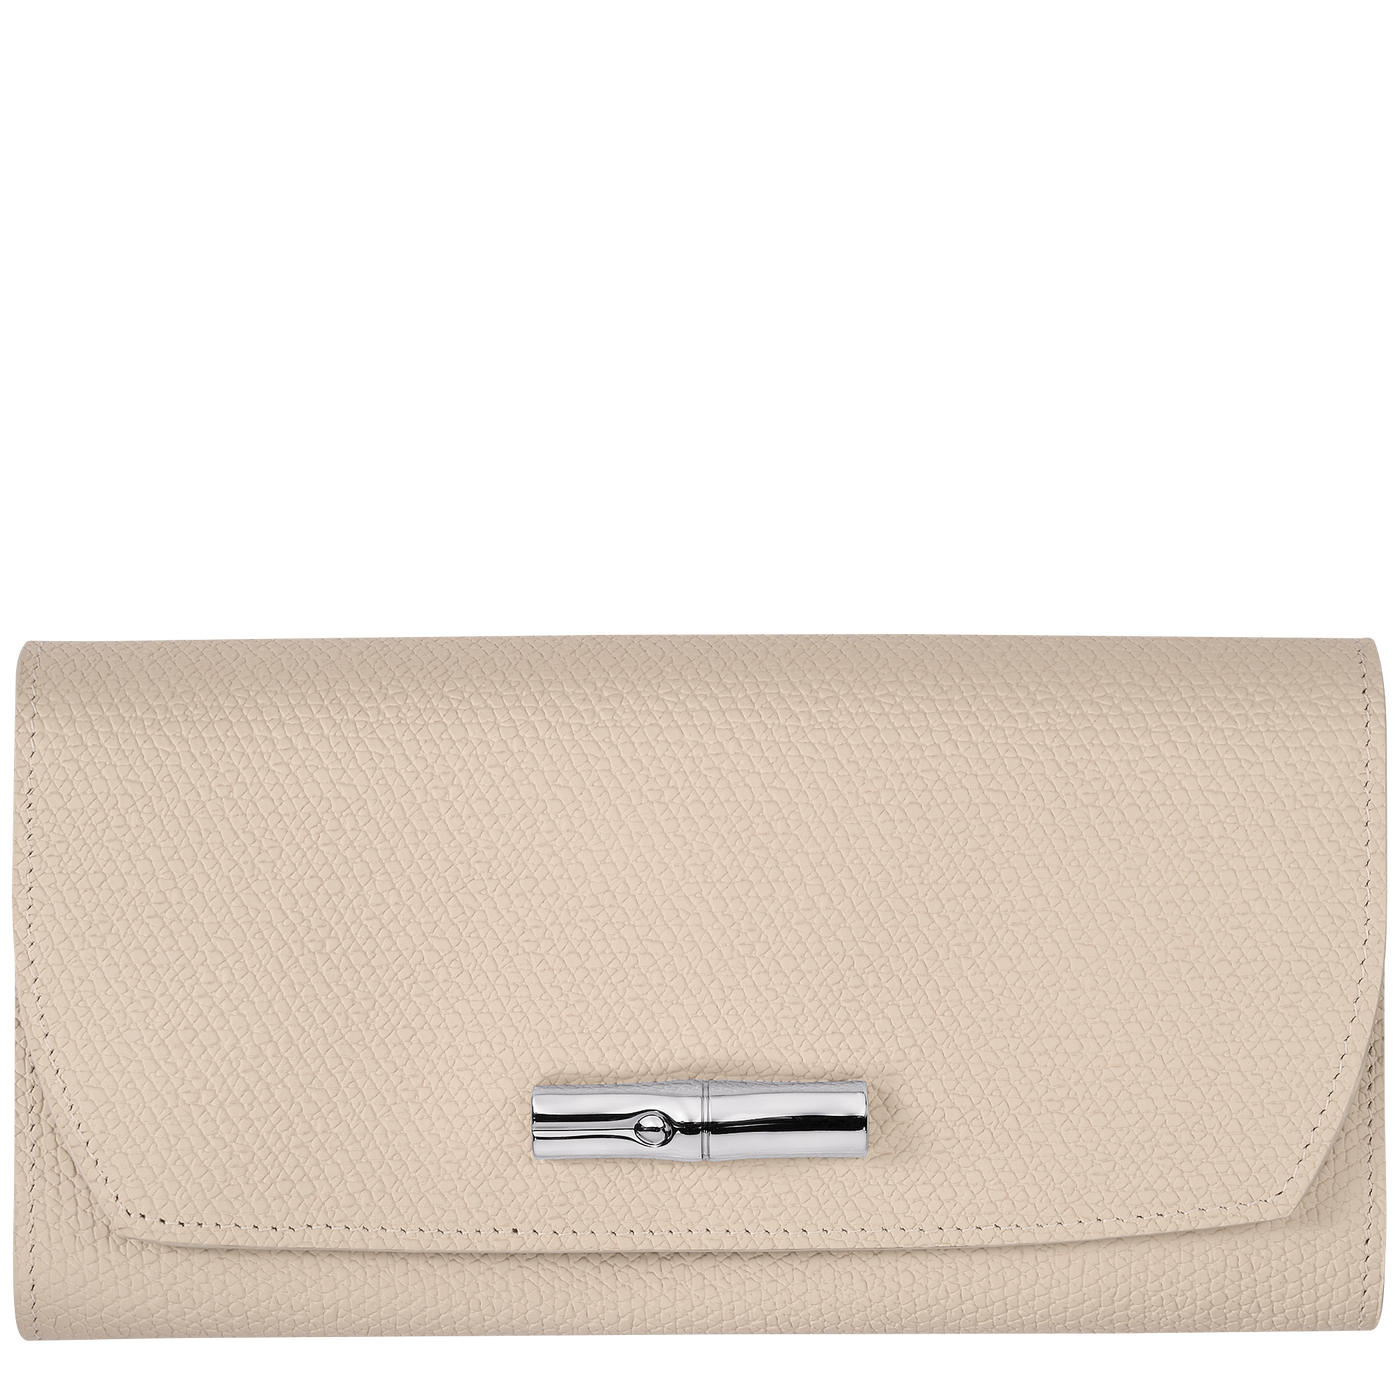 Shop The Latest Collection Of Longchamp Roseau Long Continental Wallet - L3146Hpn In Lebanon